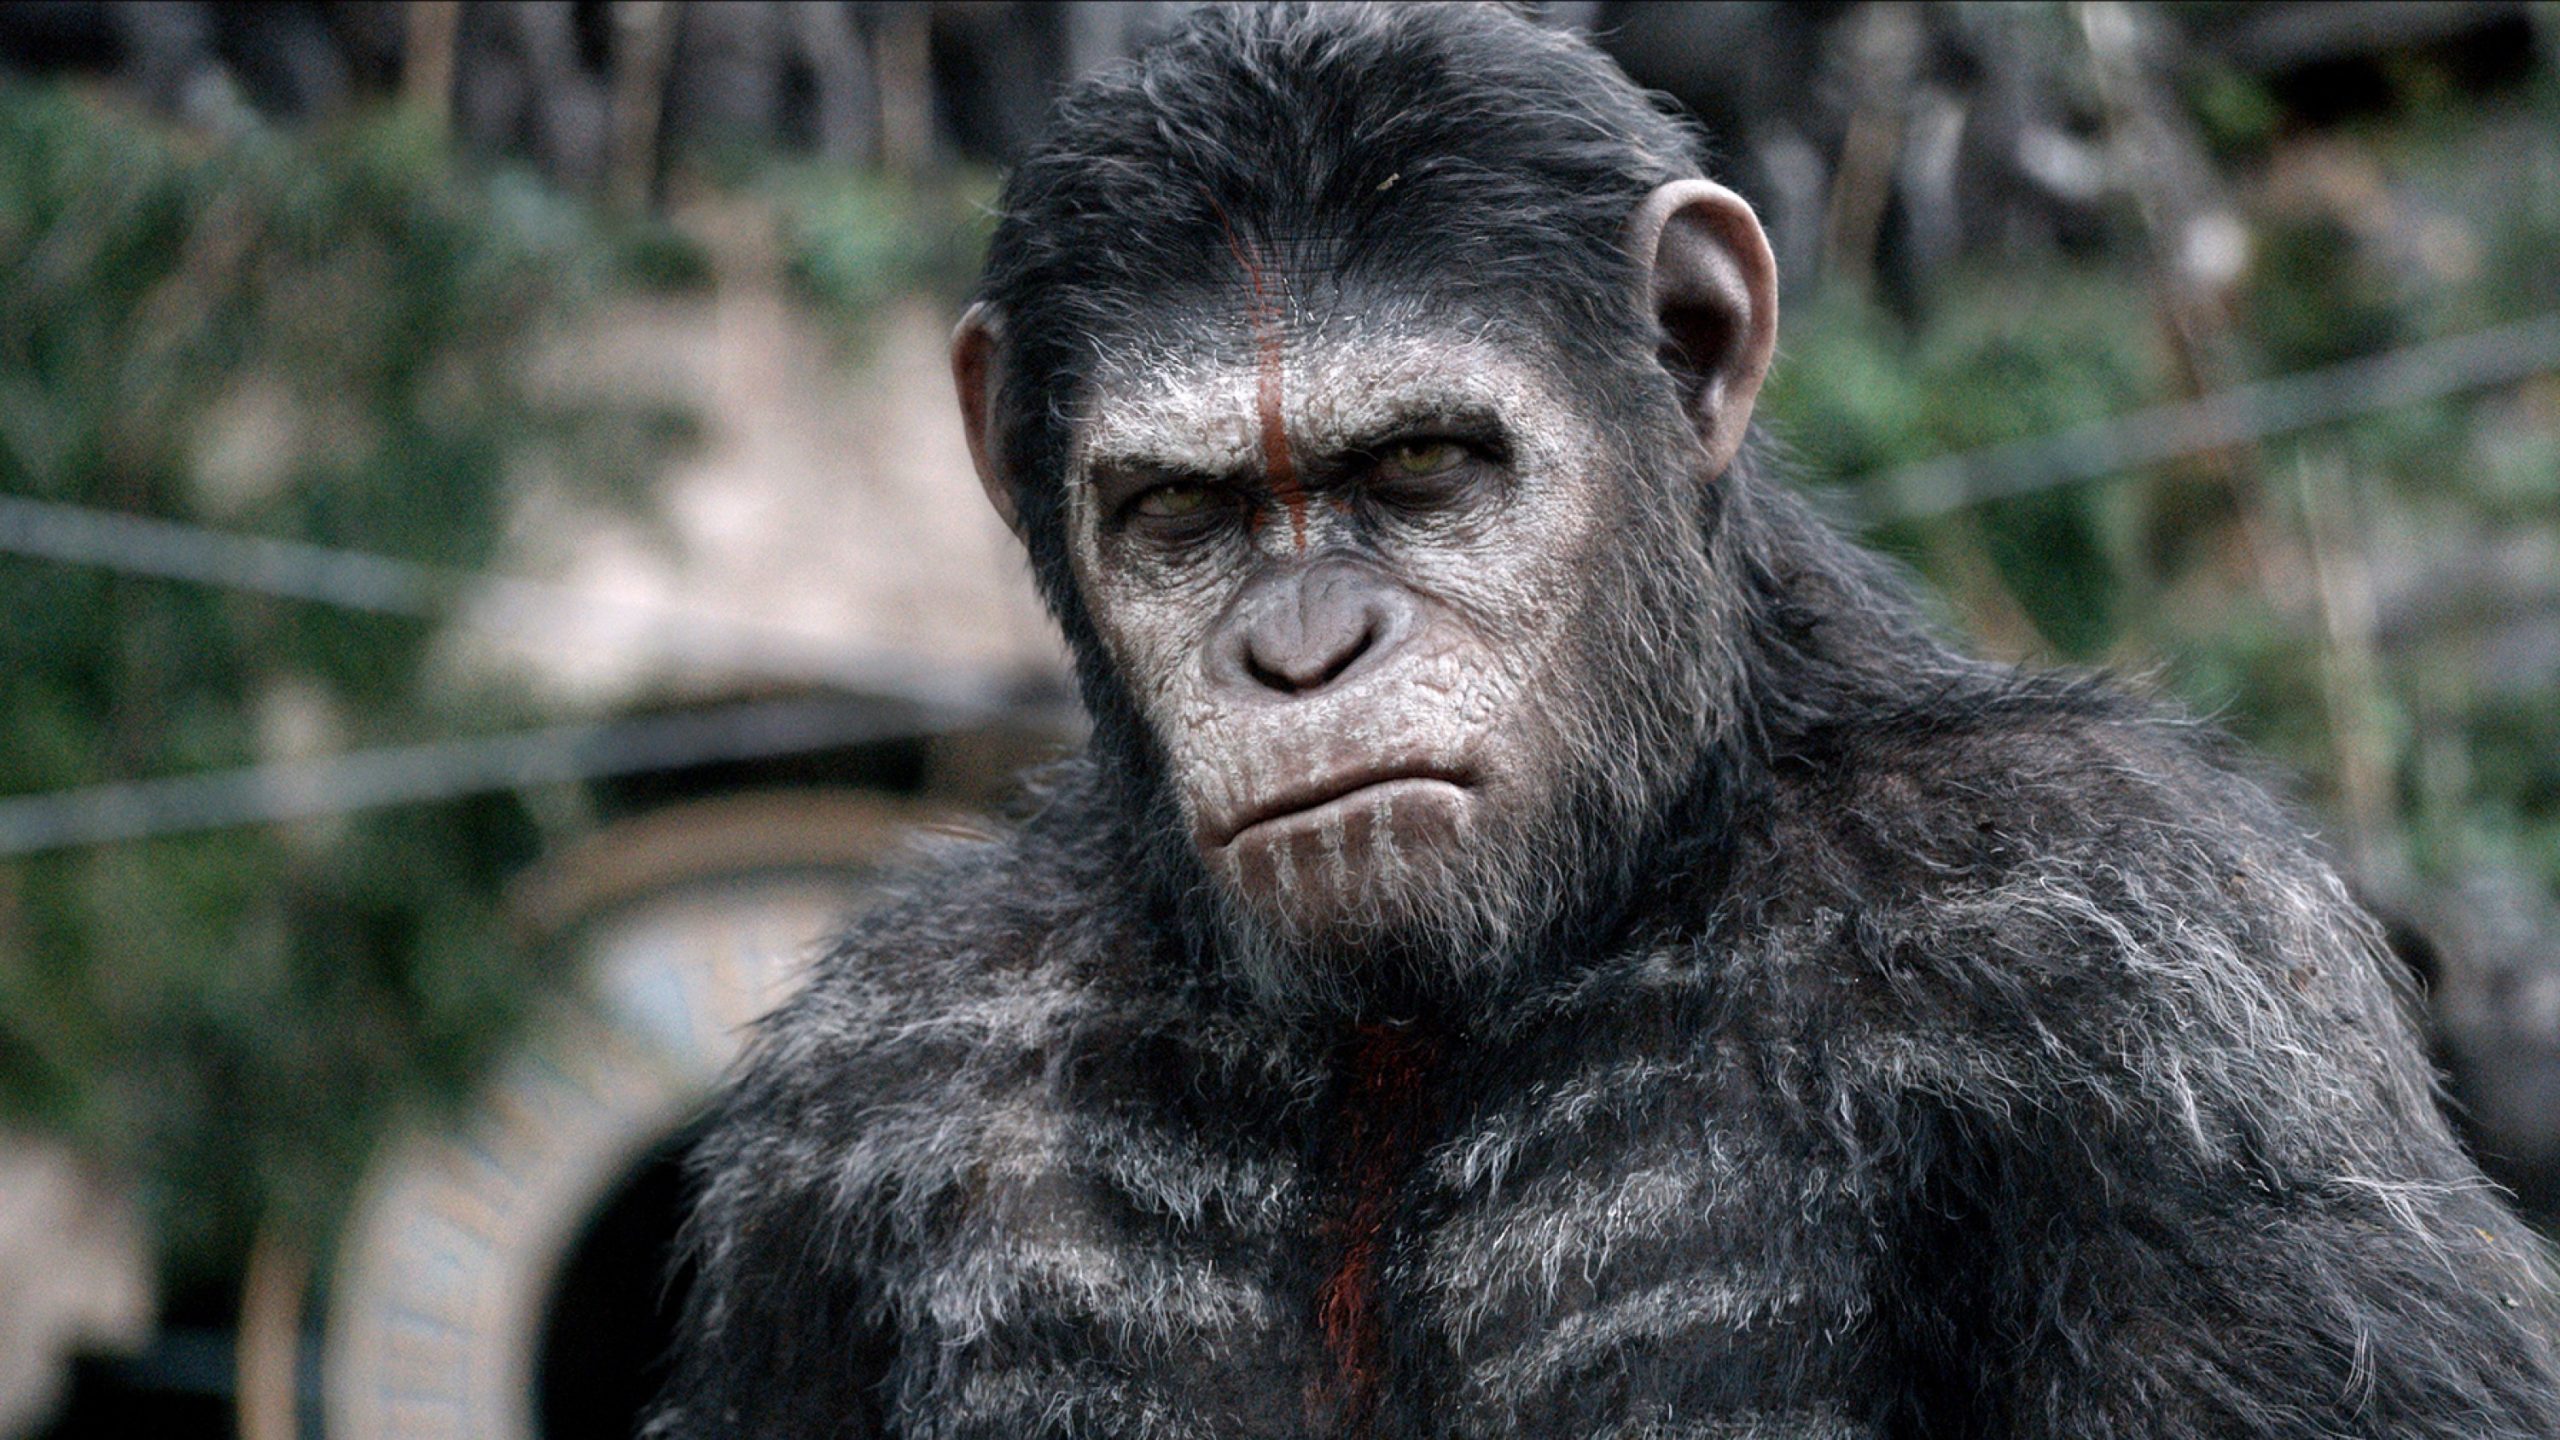 Ceaser in Dawn of the Planet of the Apes, played by Andy Serkis